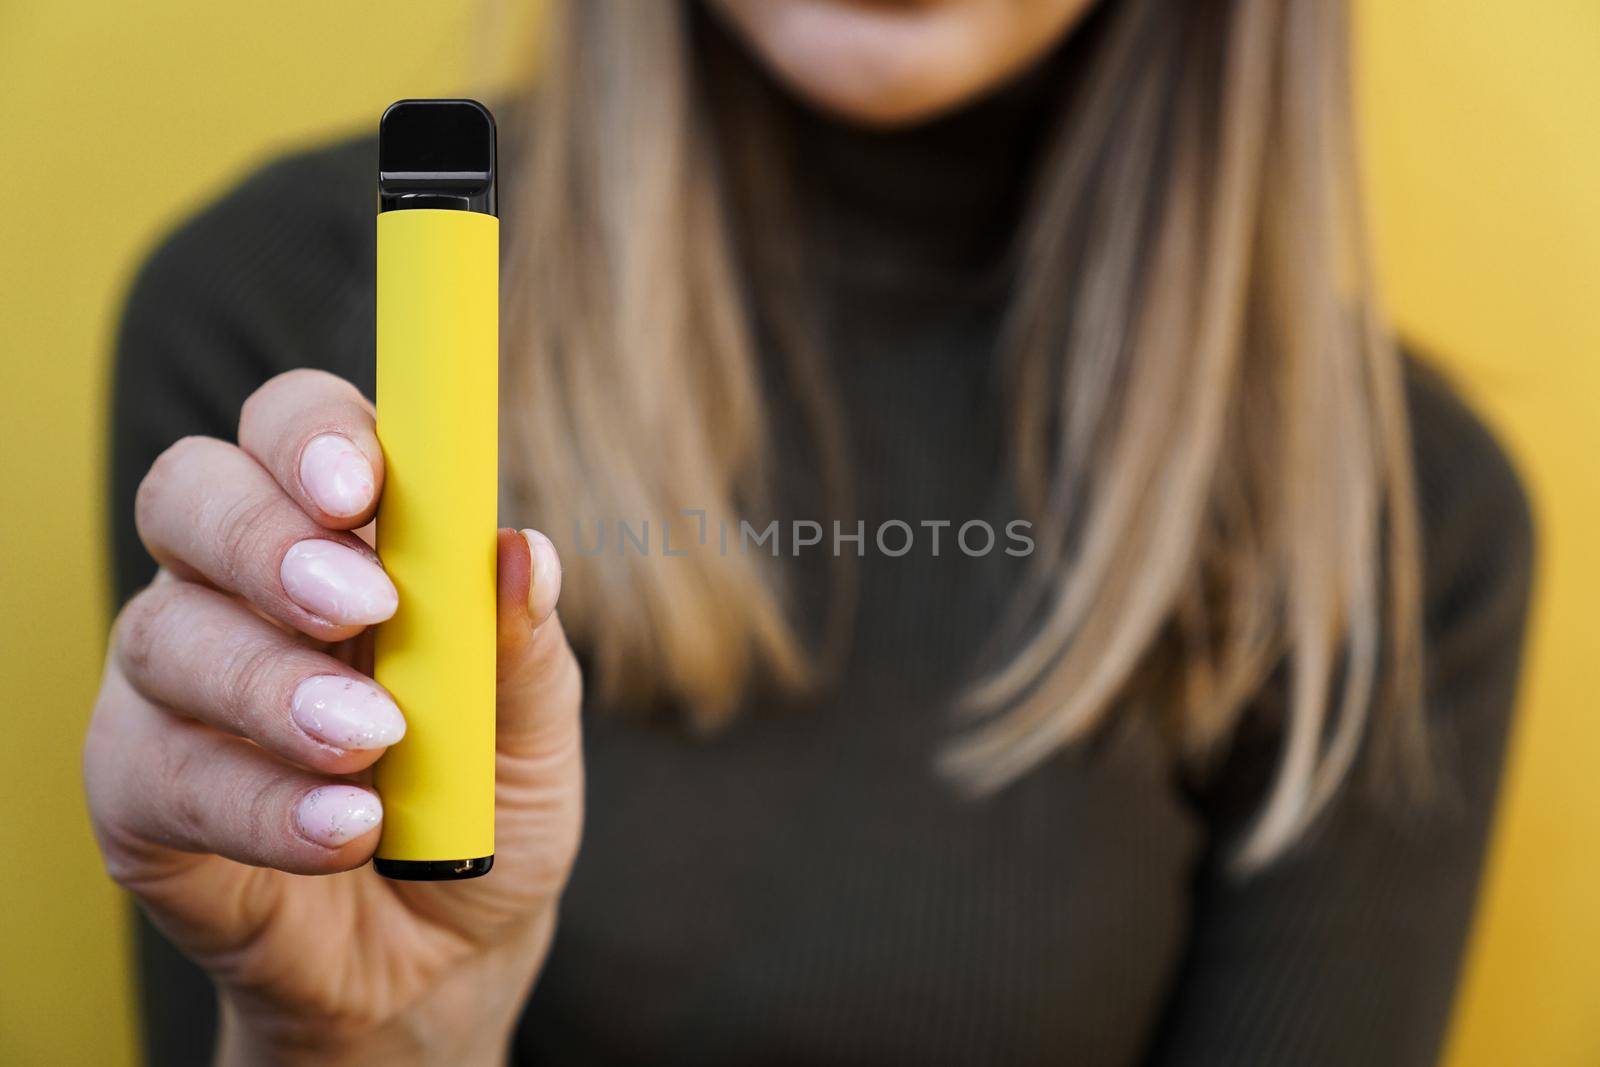 Yellow disposable electronic cigarette in a female hand. Bright yellow background. Melon, pineapple or lemon flavored vape